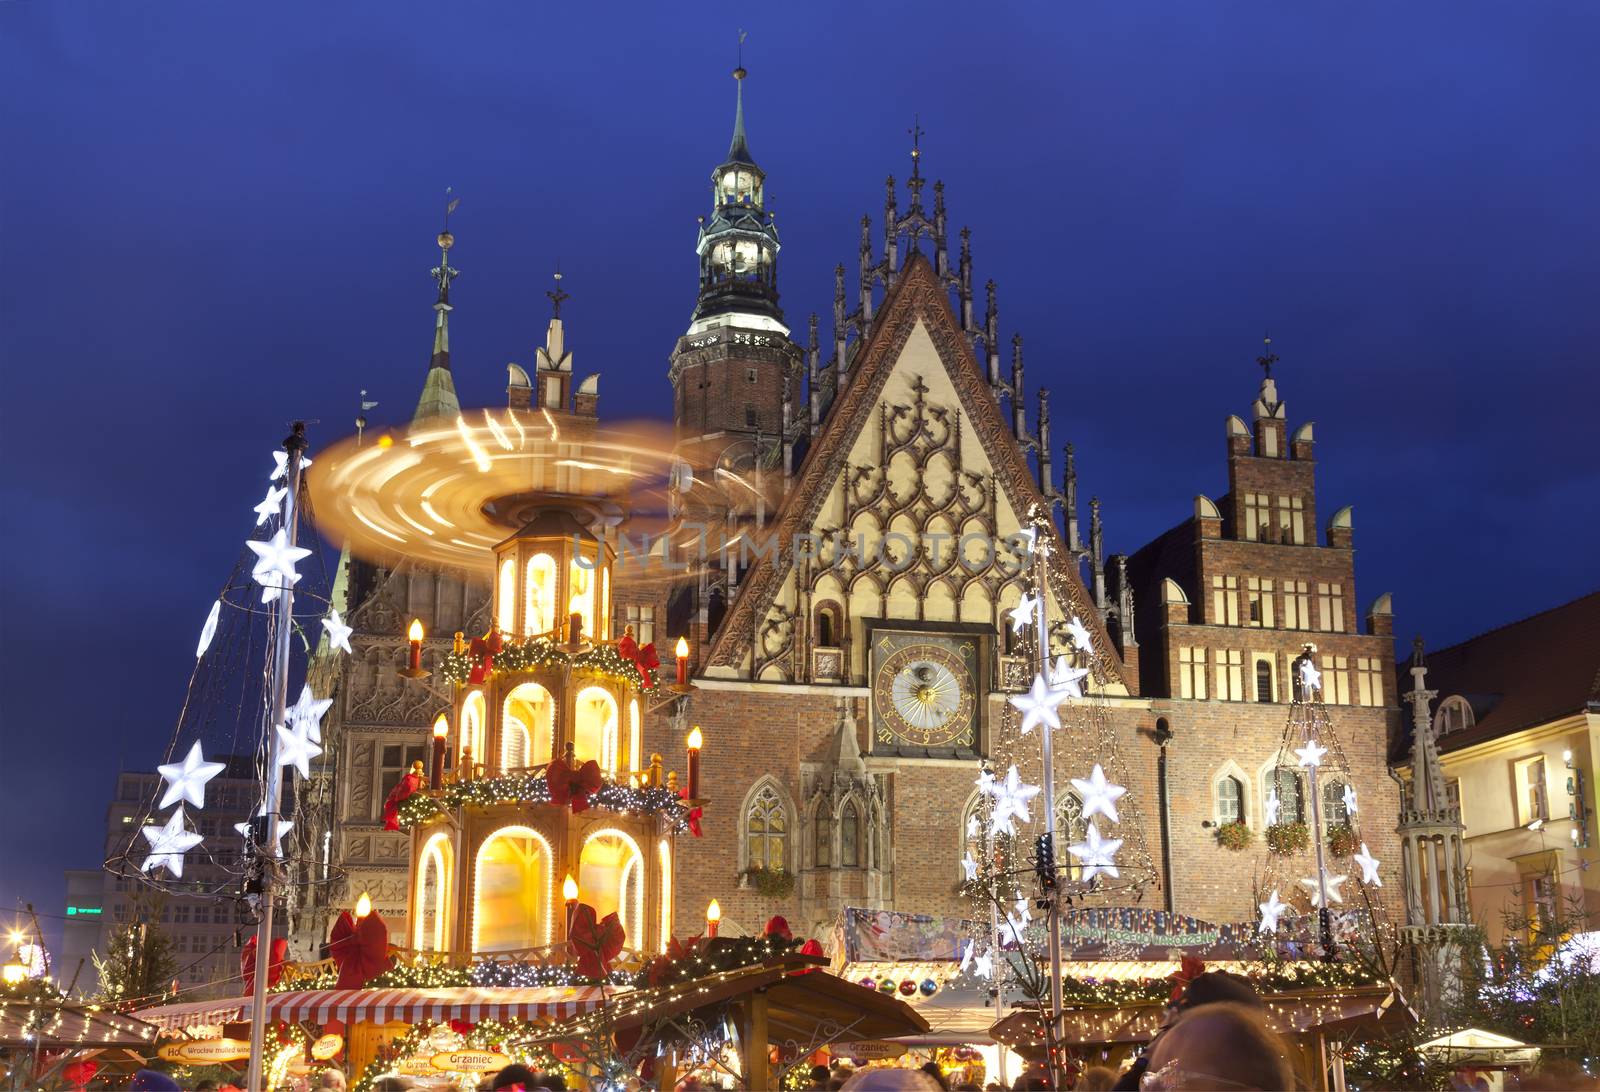 Christmas market in Wroclaw, Poland at evening.Wroclaw is European city of culture in 2016.